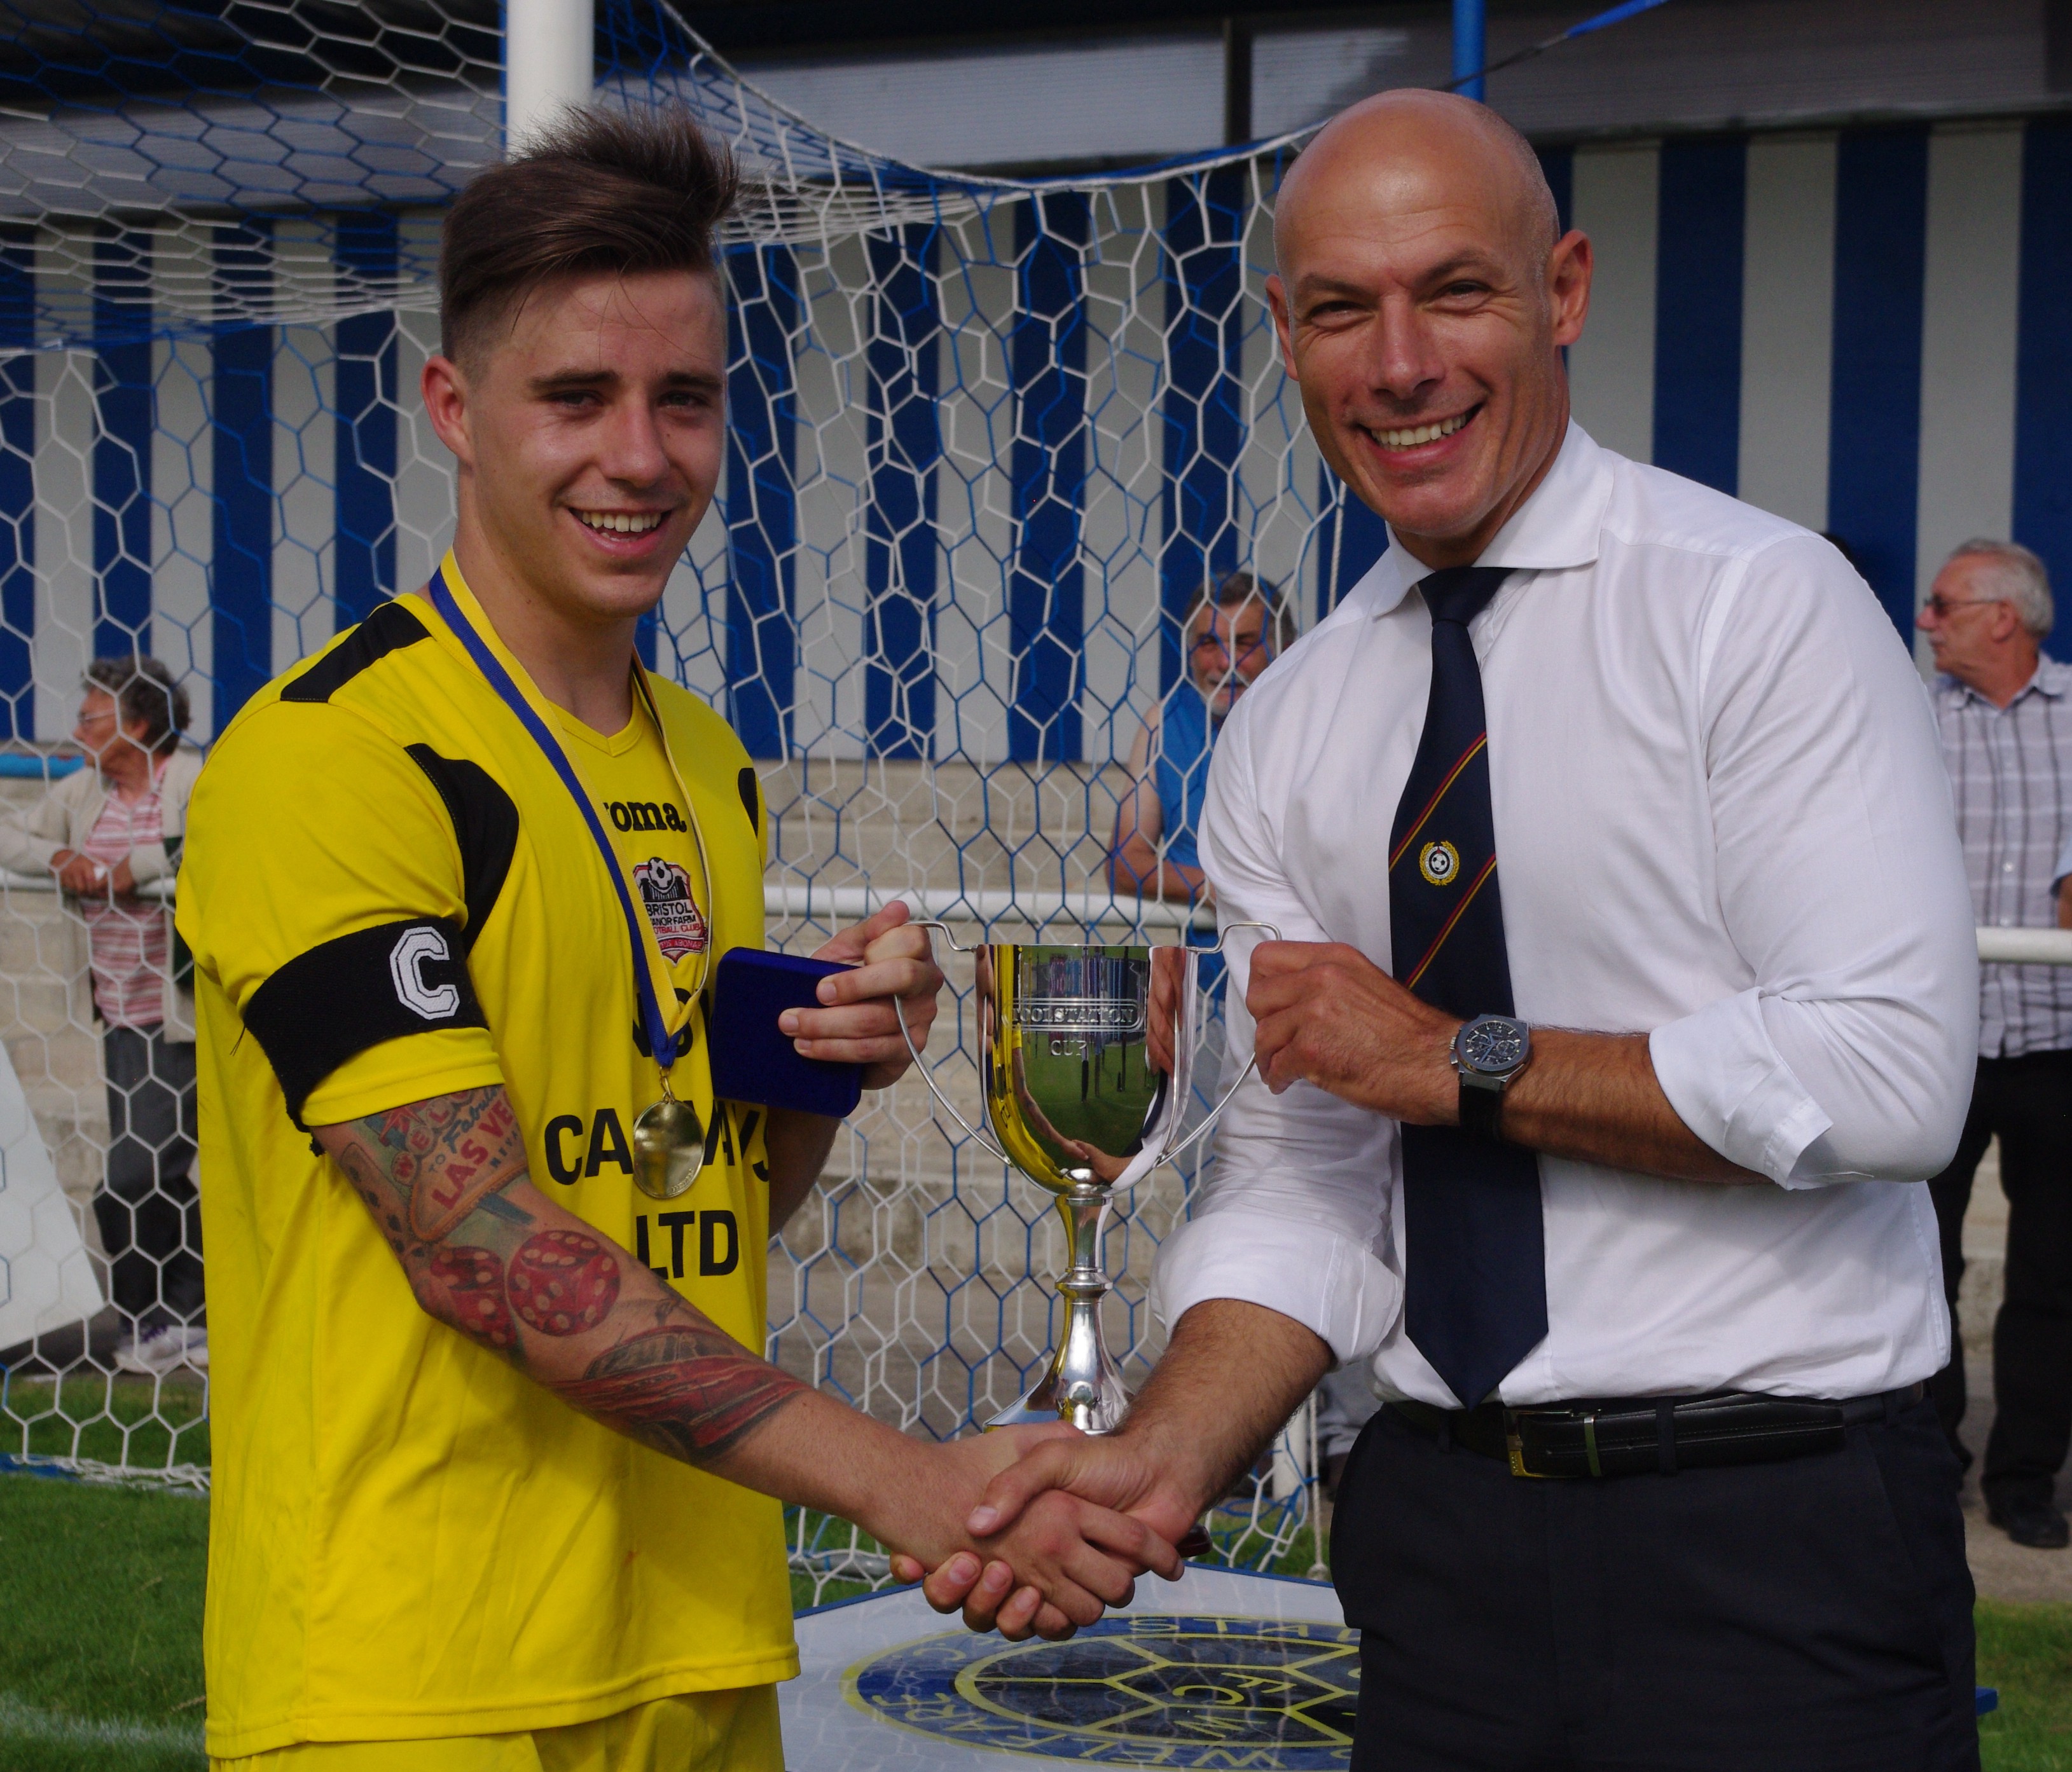 England's World Cup referee Howard Webb presents Bristol Manor Farm captain Jordan Metters with the Toolstation Cup after their 1-0 win over Knaresborough Town